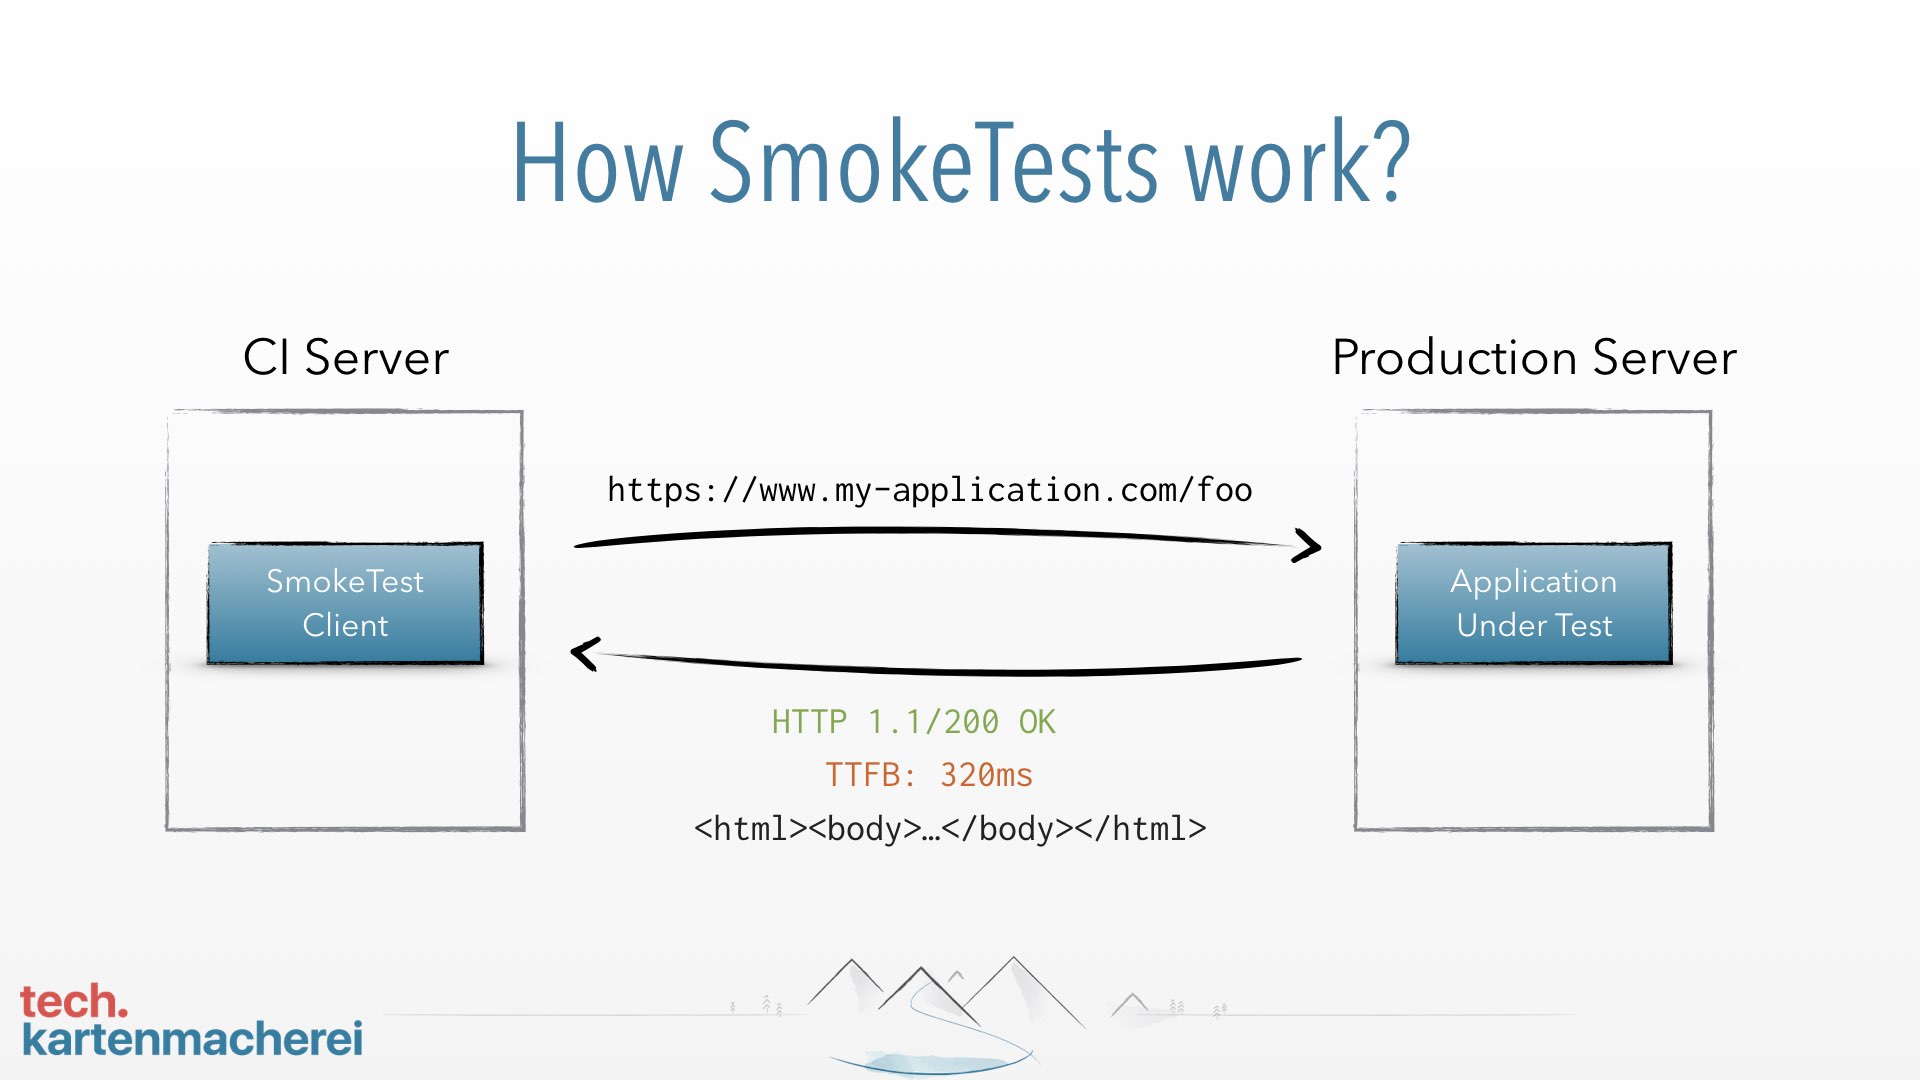 With this slide Sebastian Thoss explains how SmokeTests can be visualised